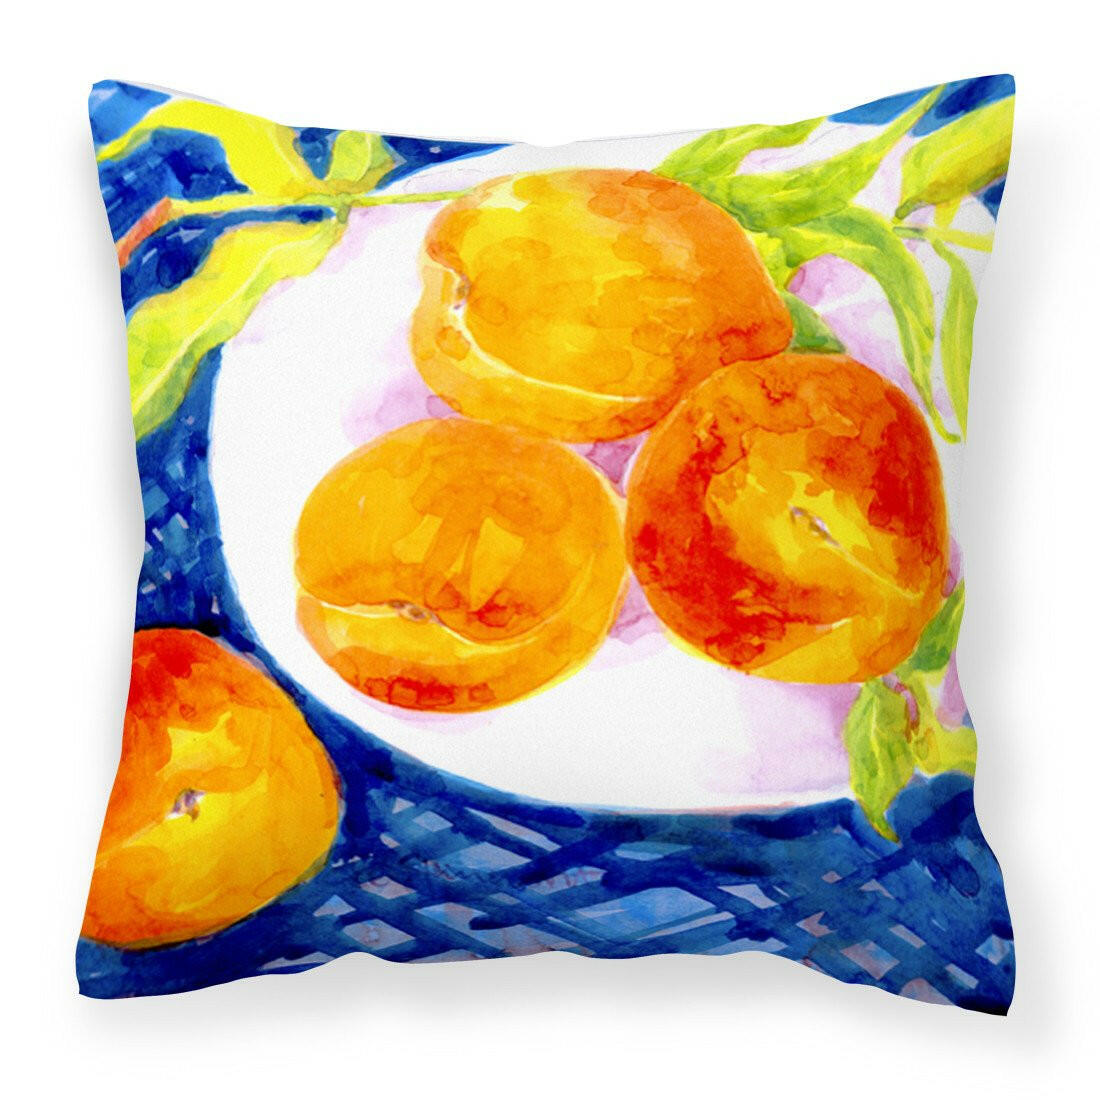 Bowl of Peaches Fabric Decorative Pillow 6110PW1414 - the-store.com